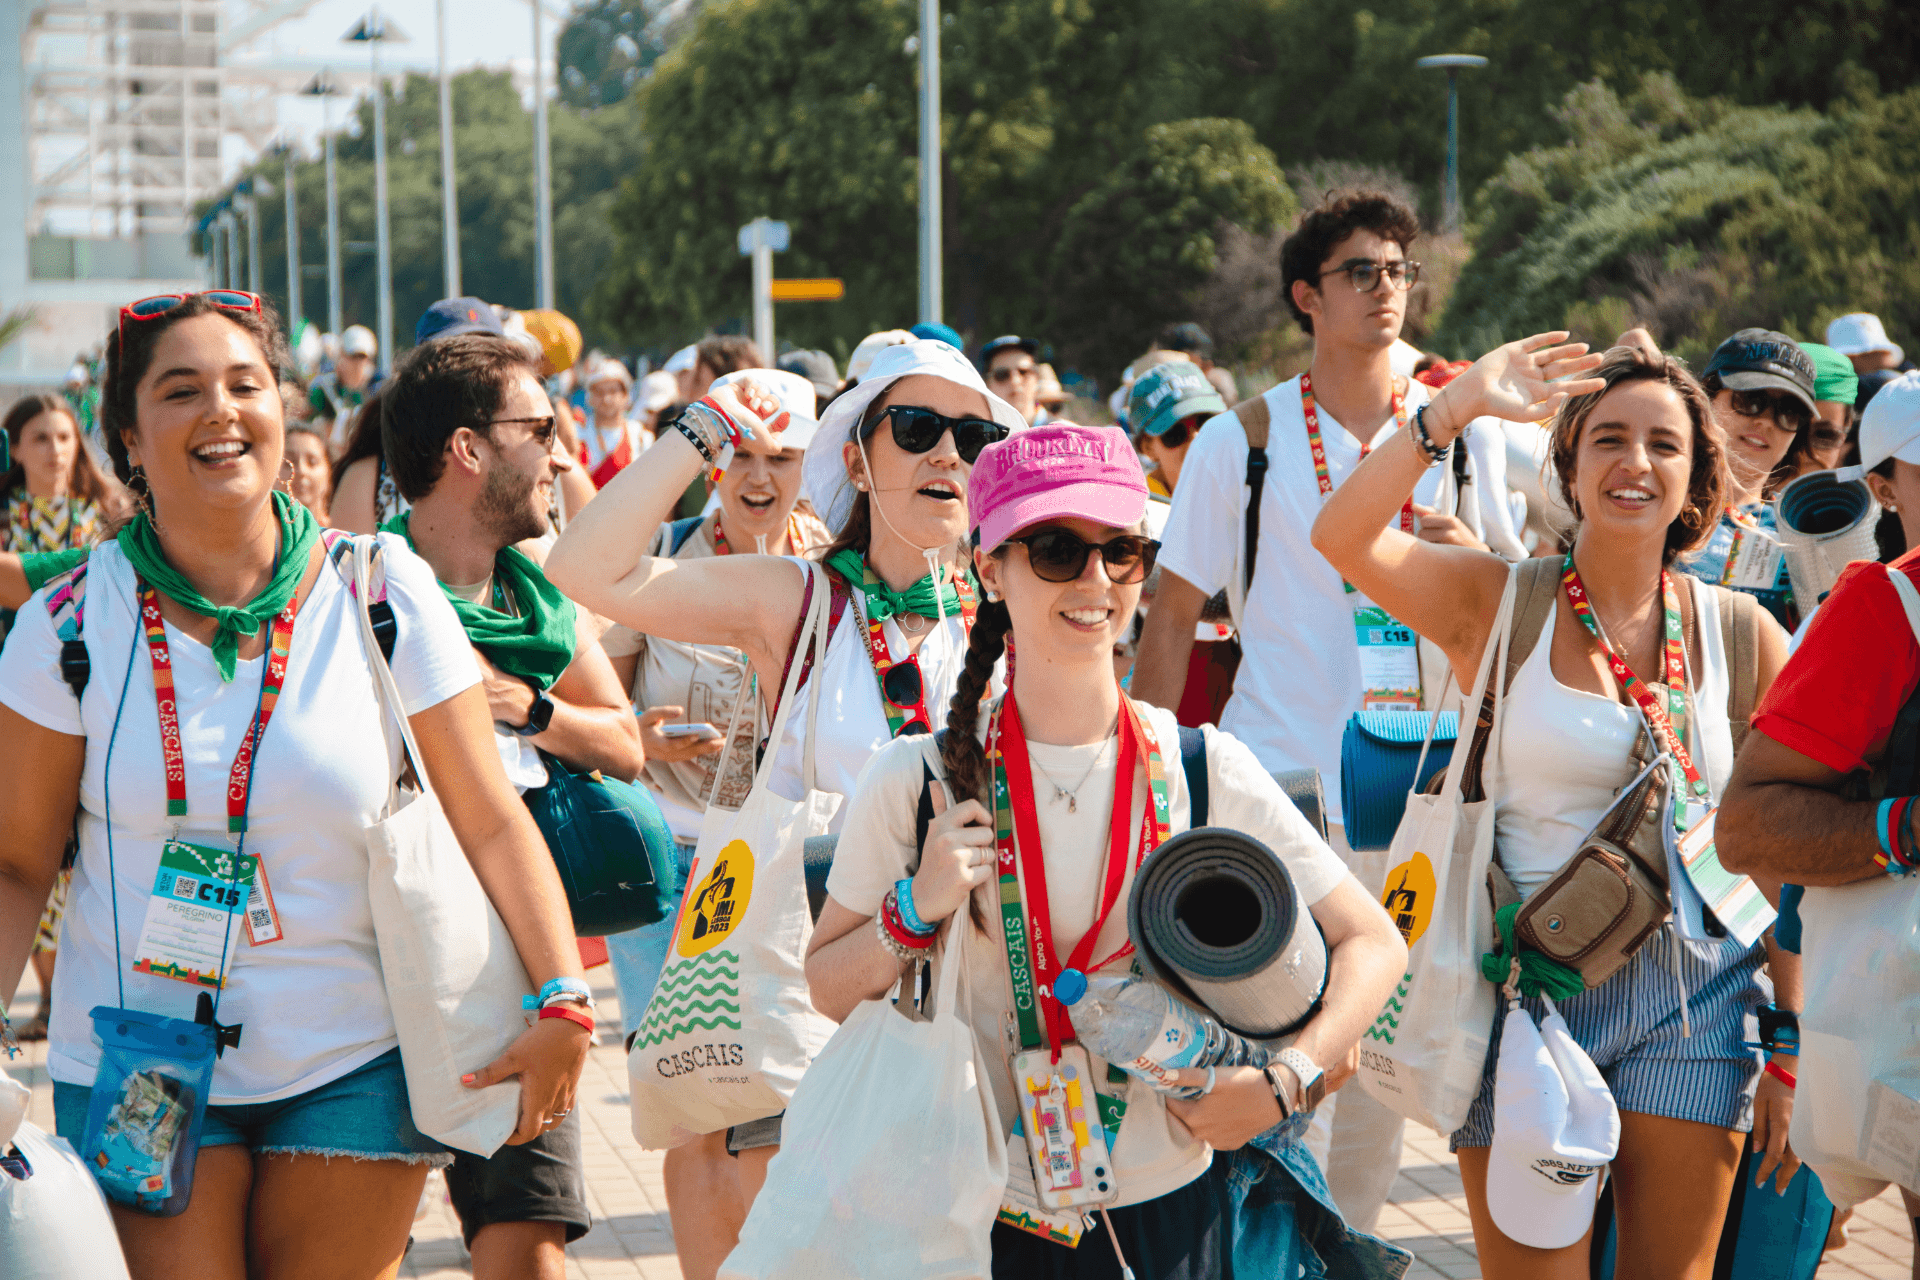 Featured image from the article: The WYD experience from different points of view